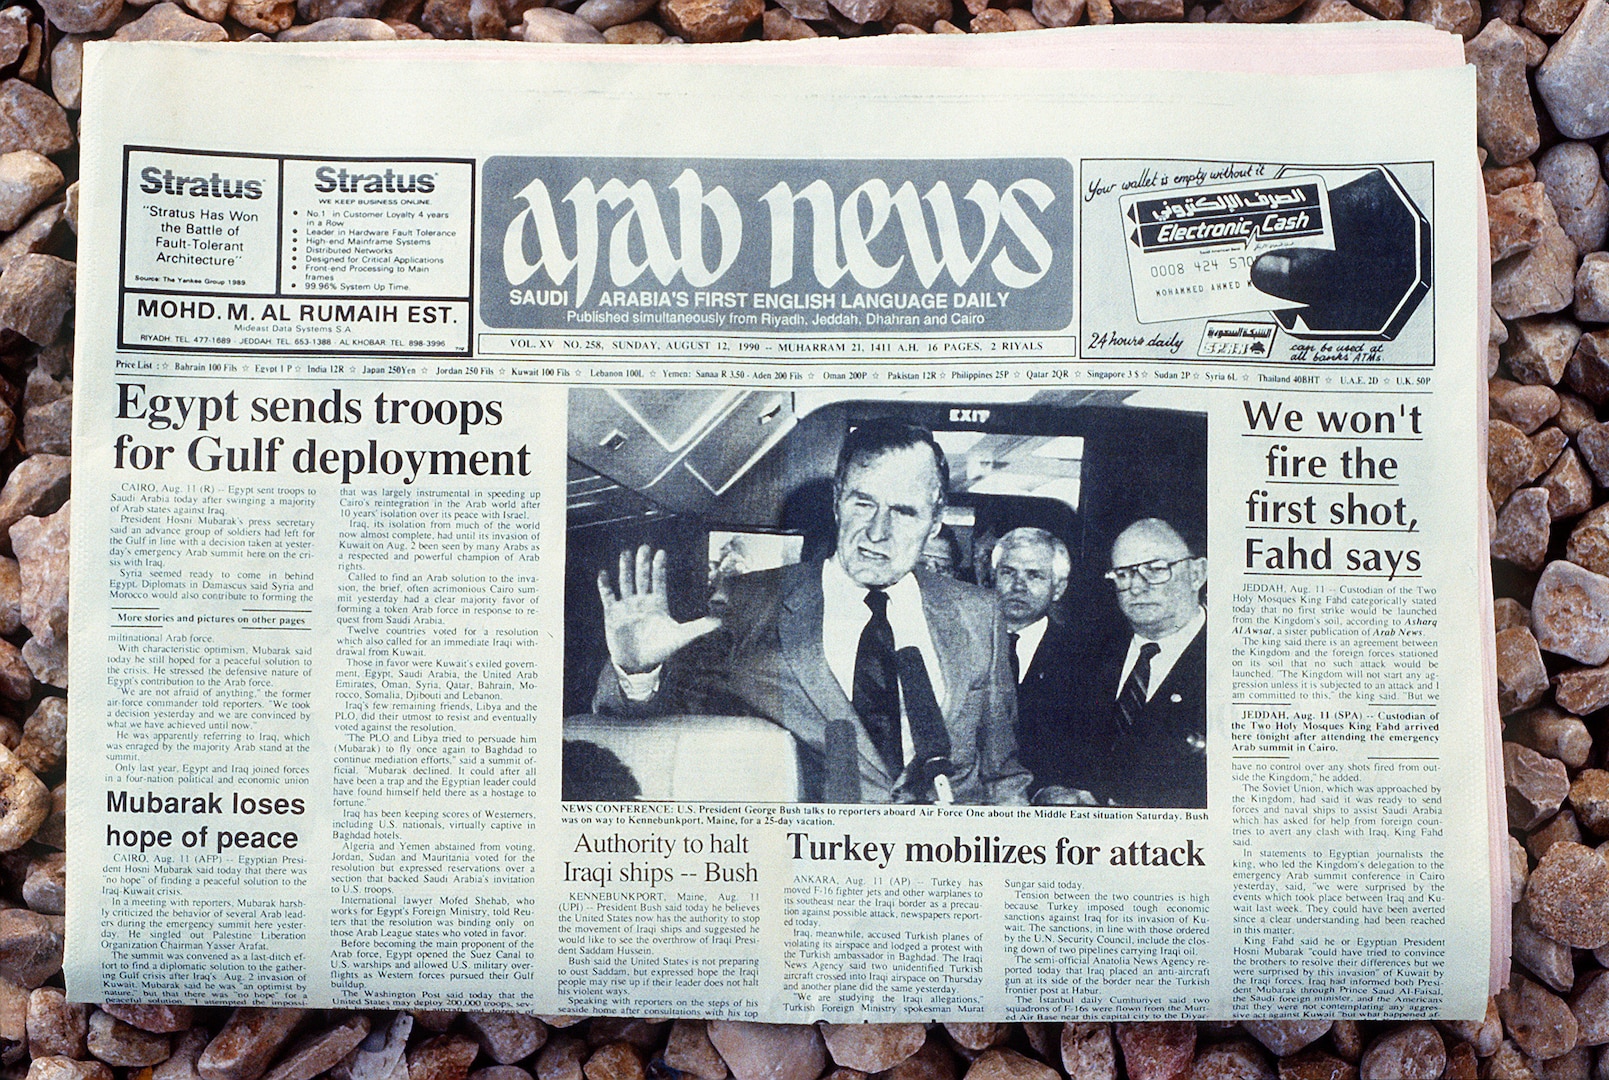 Image of a newspaper from Arab News.